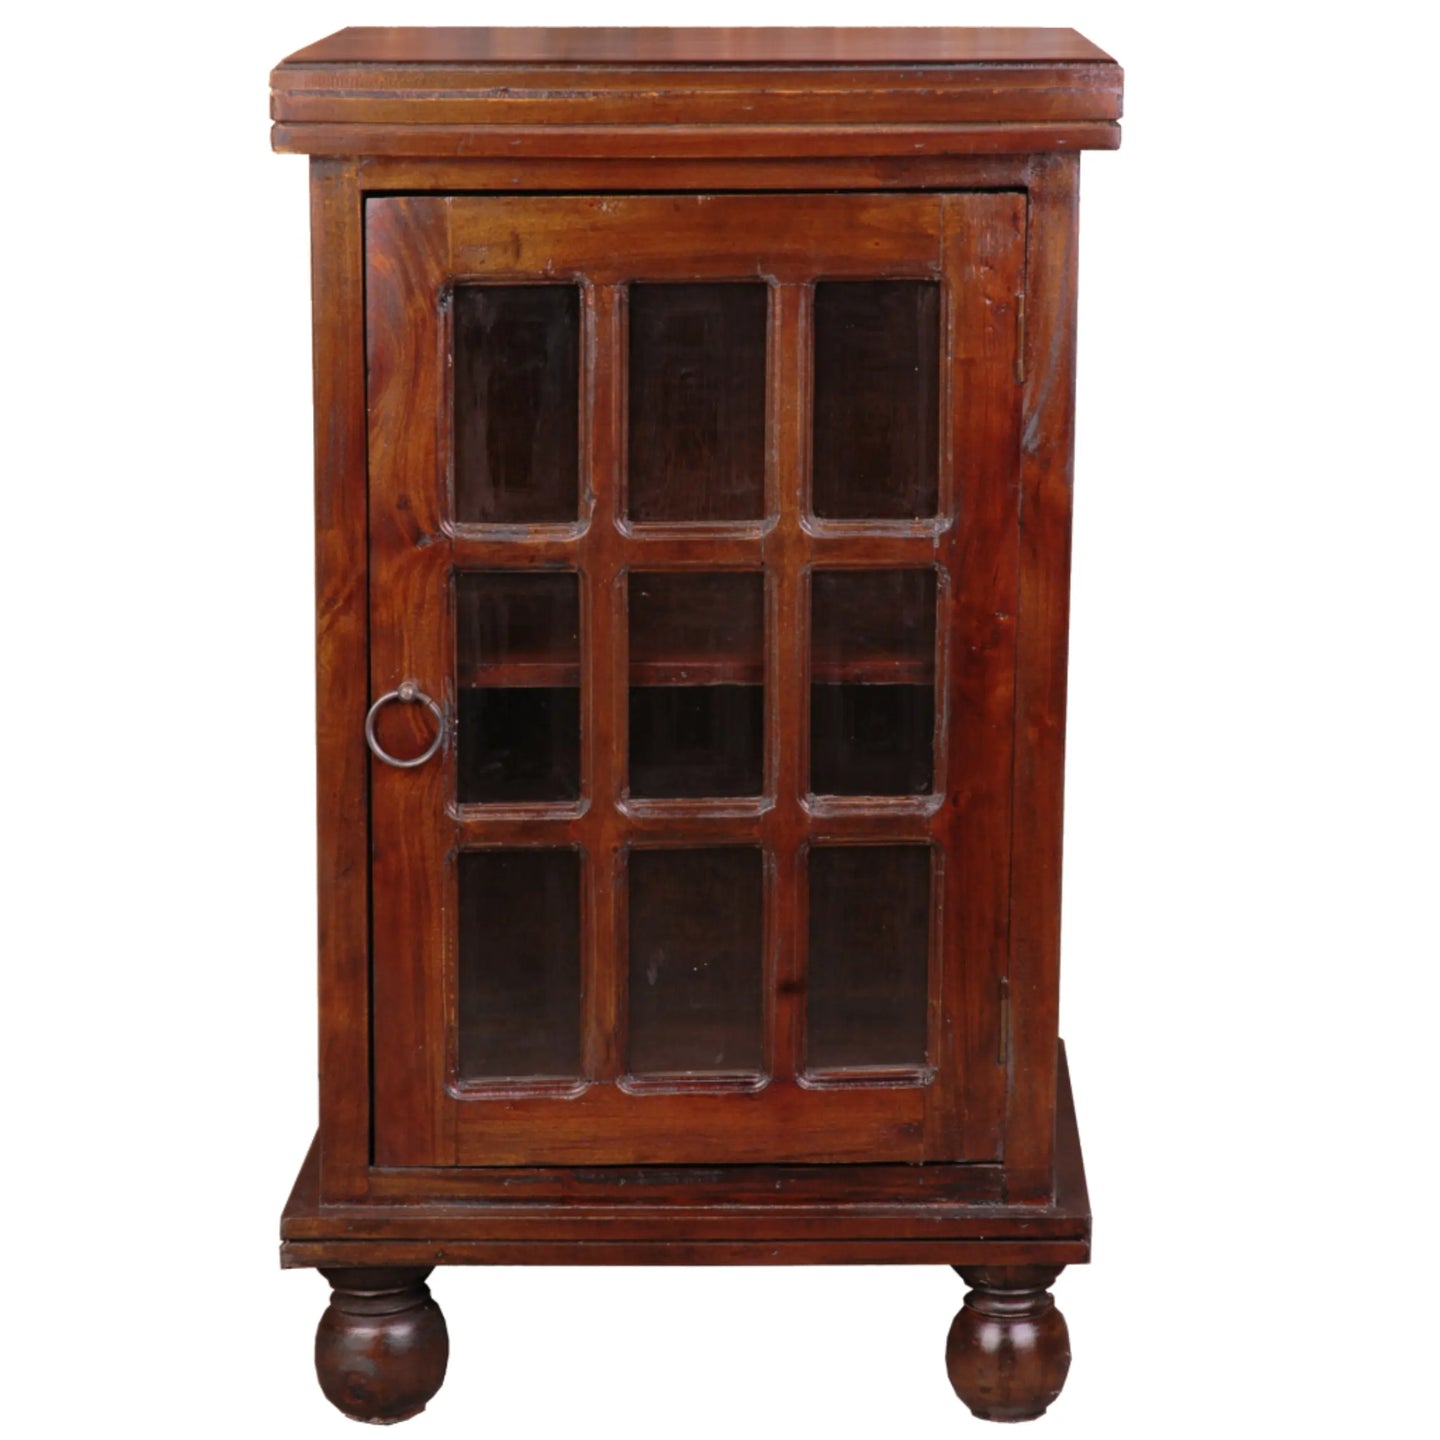 Sunset Trading Cottage End Table with Glass Door | Walnut Solid Wood | Fully Assembled Small Display Cabinet